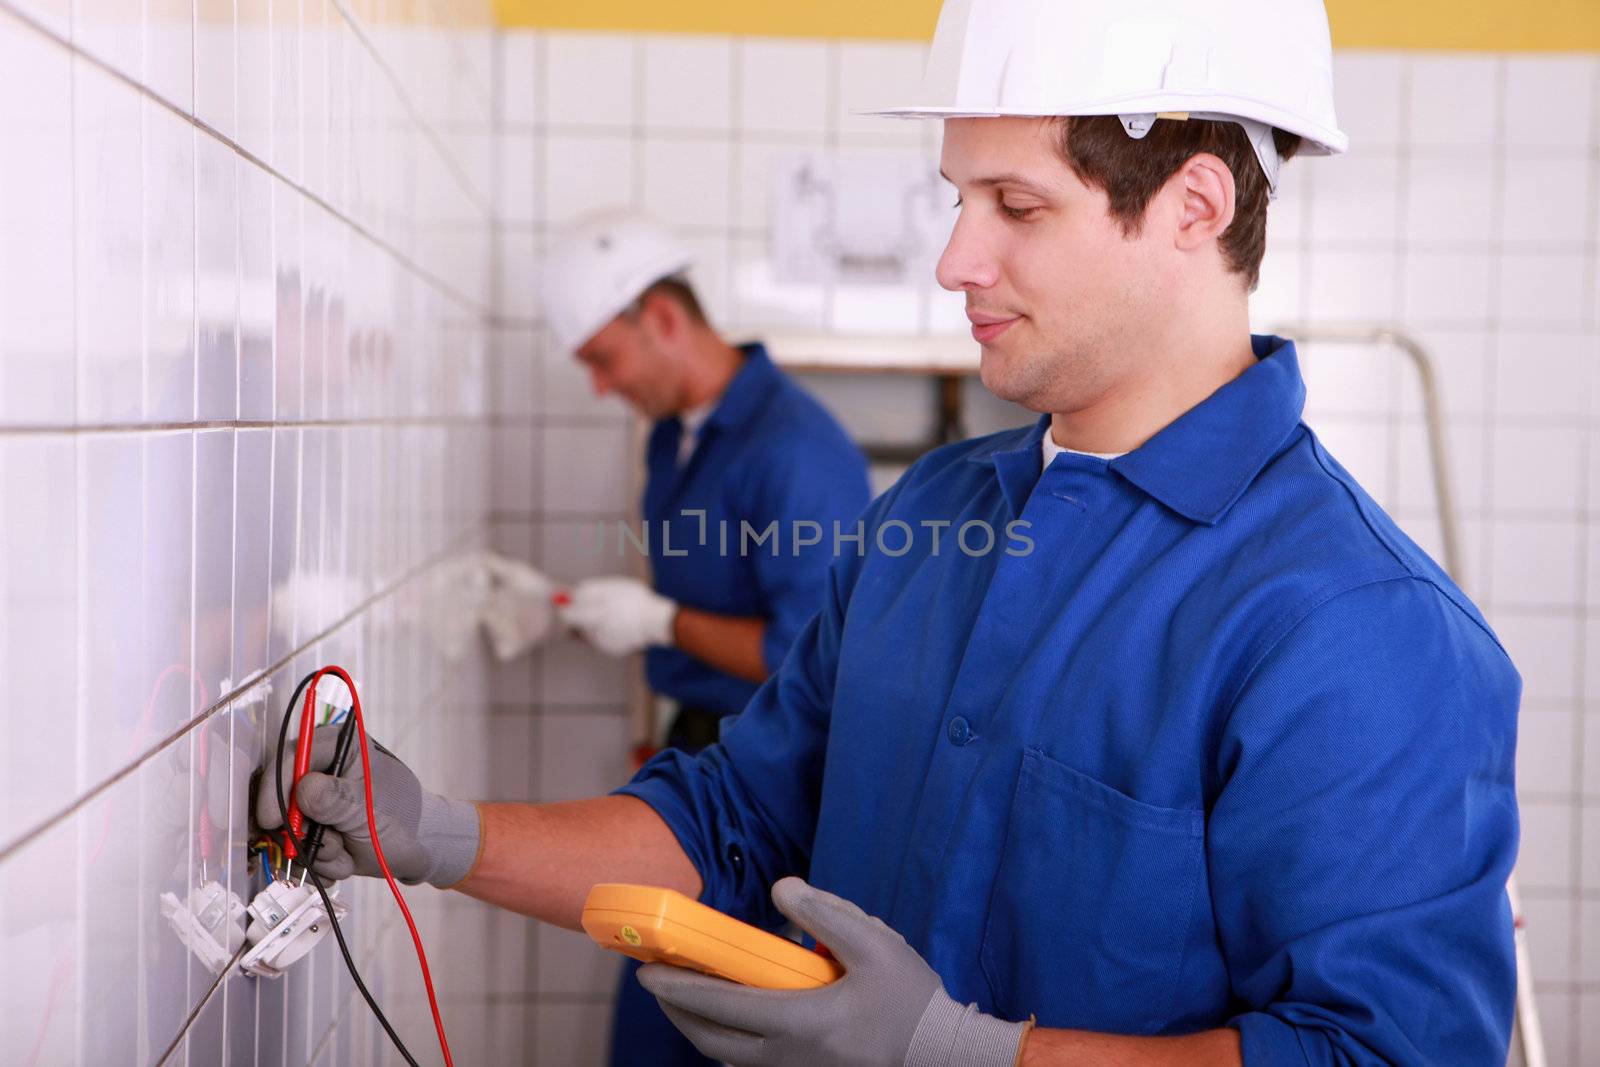 Two young electricians at work in a tiled room